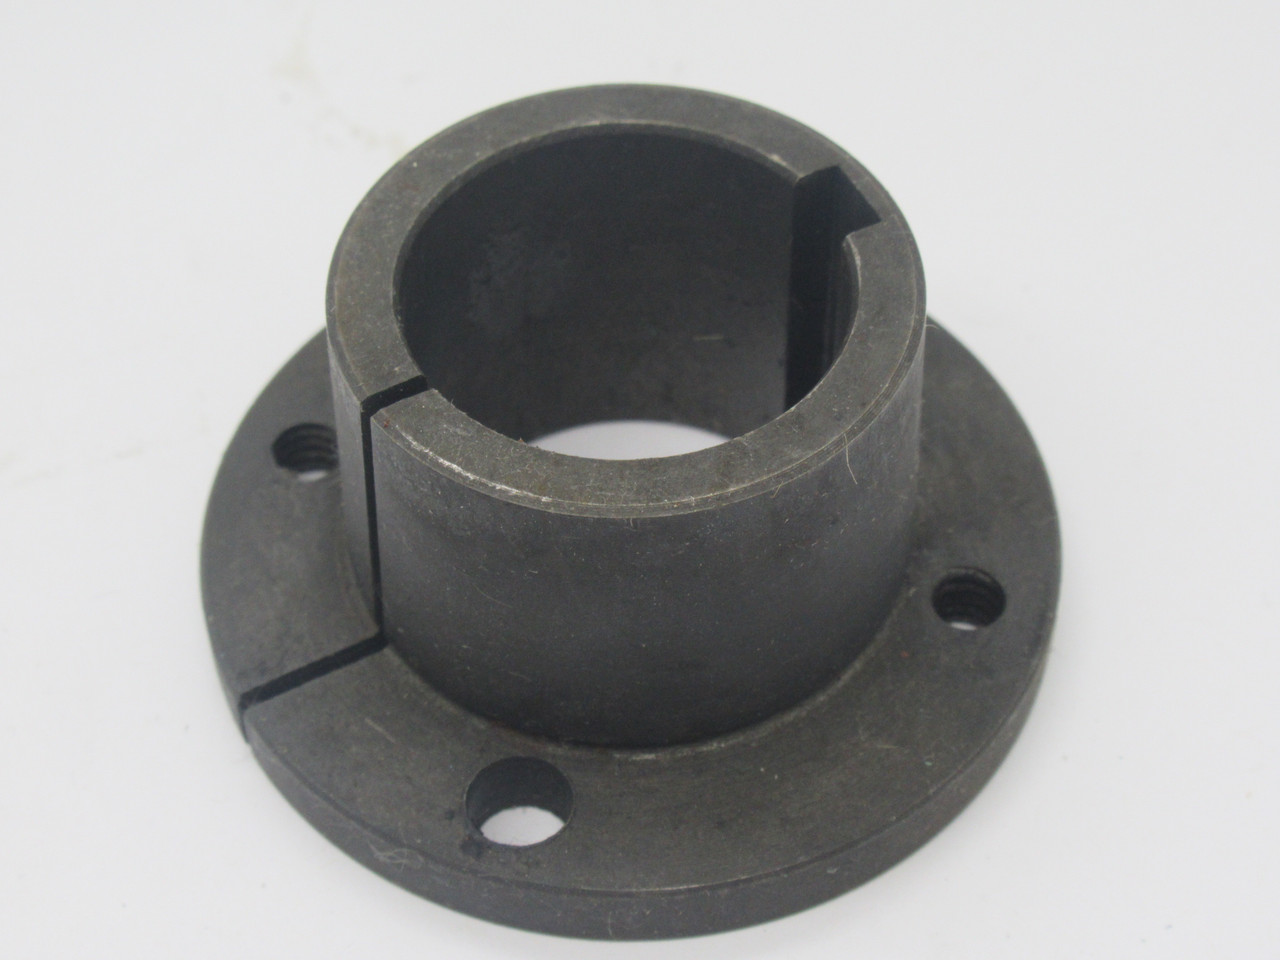 Generic QTX1-3/16 Quick Disconnect Bushing 1-5/8" Outer Diameter 1-3/16" Bore USED